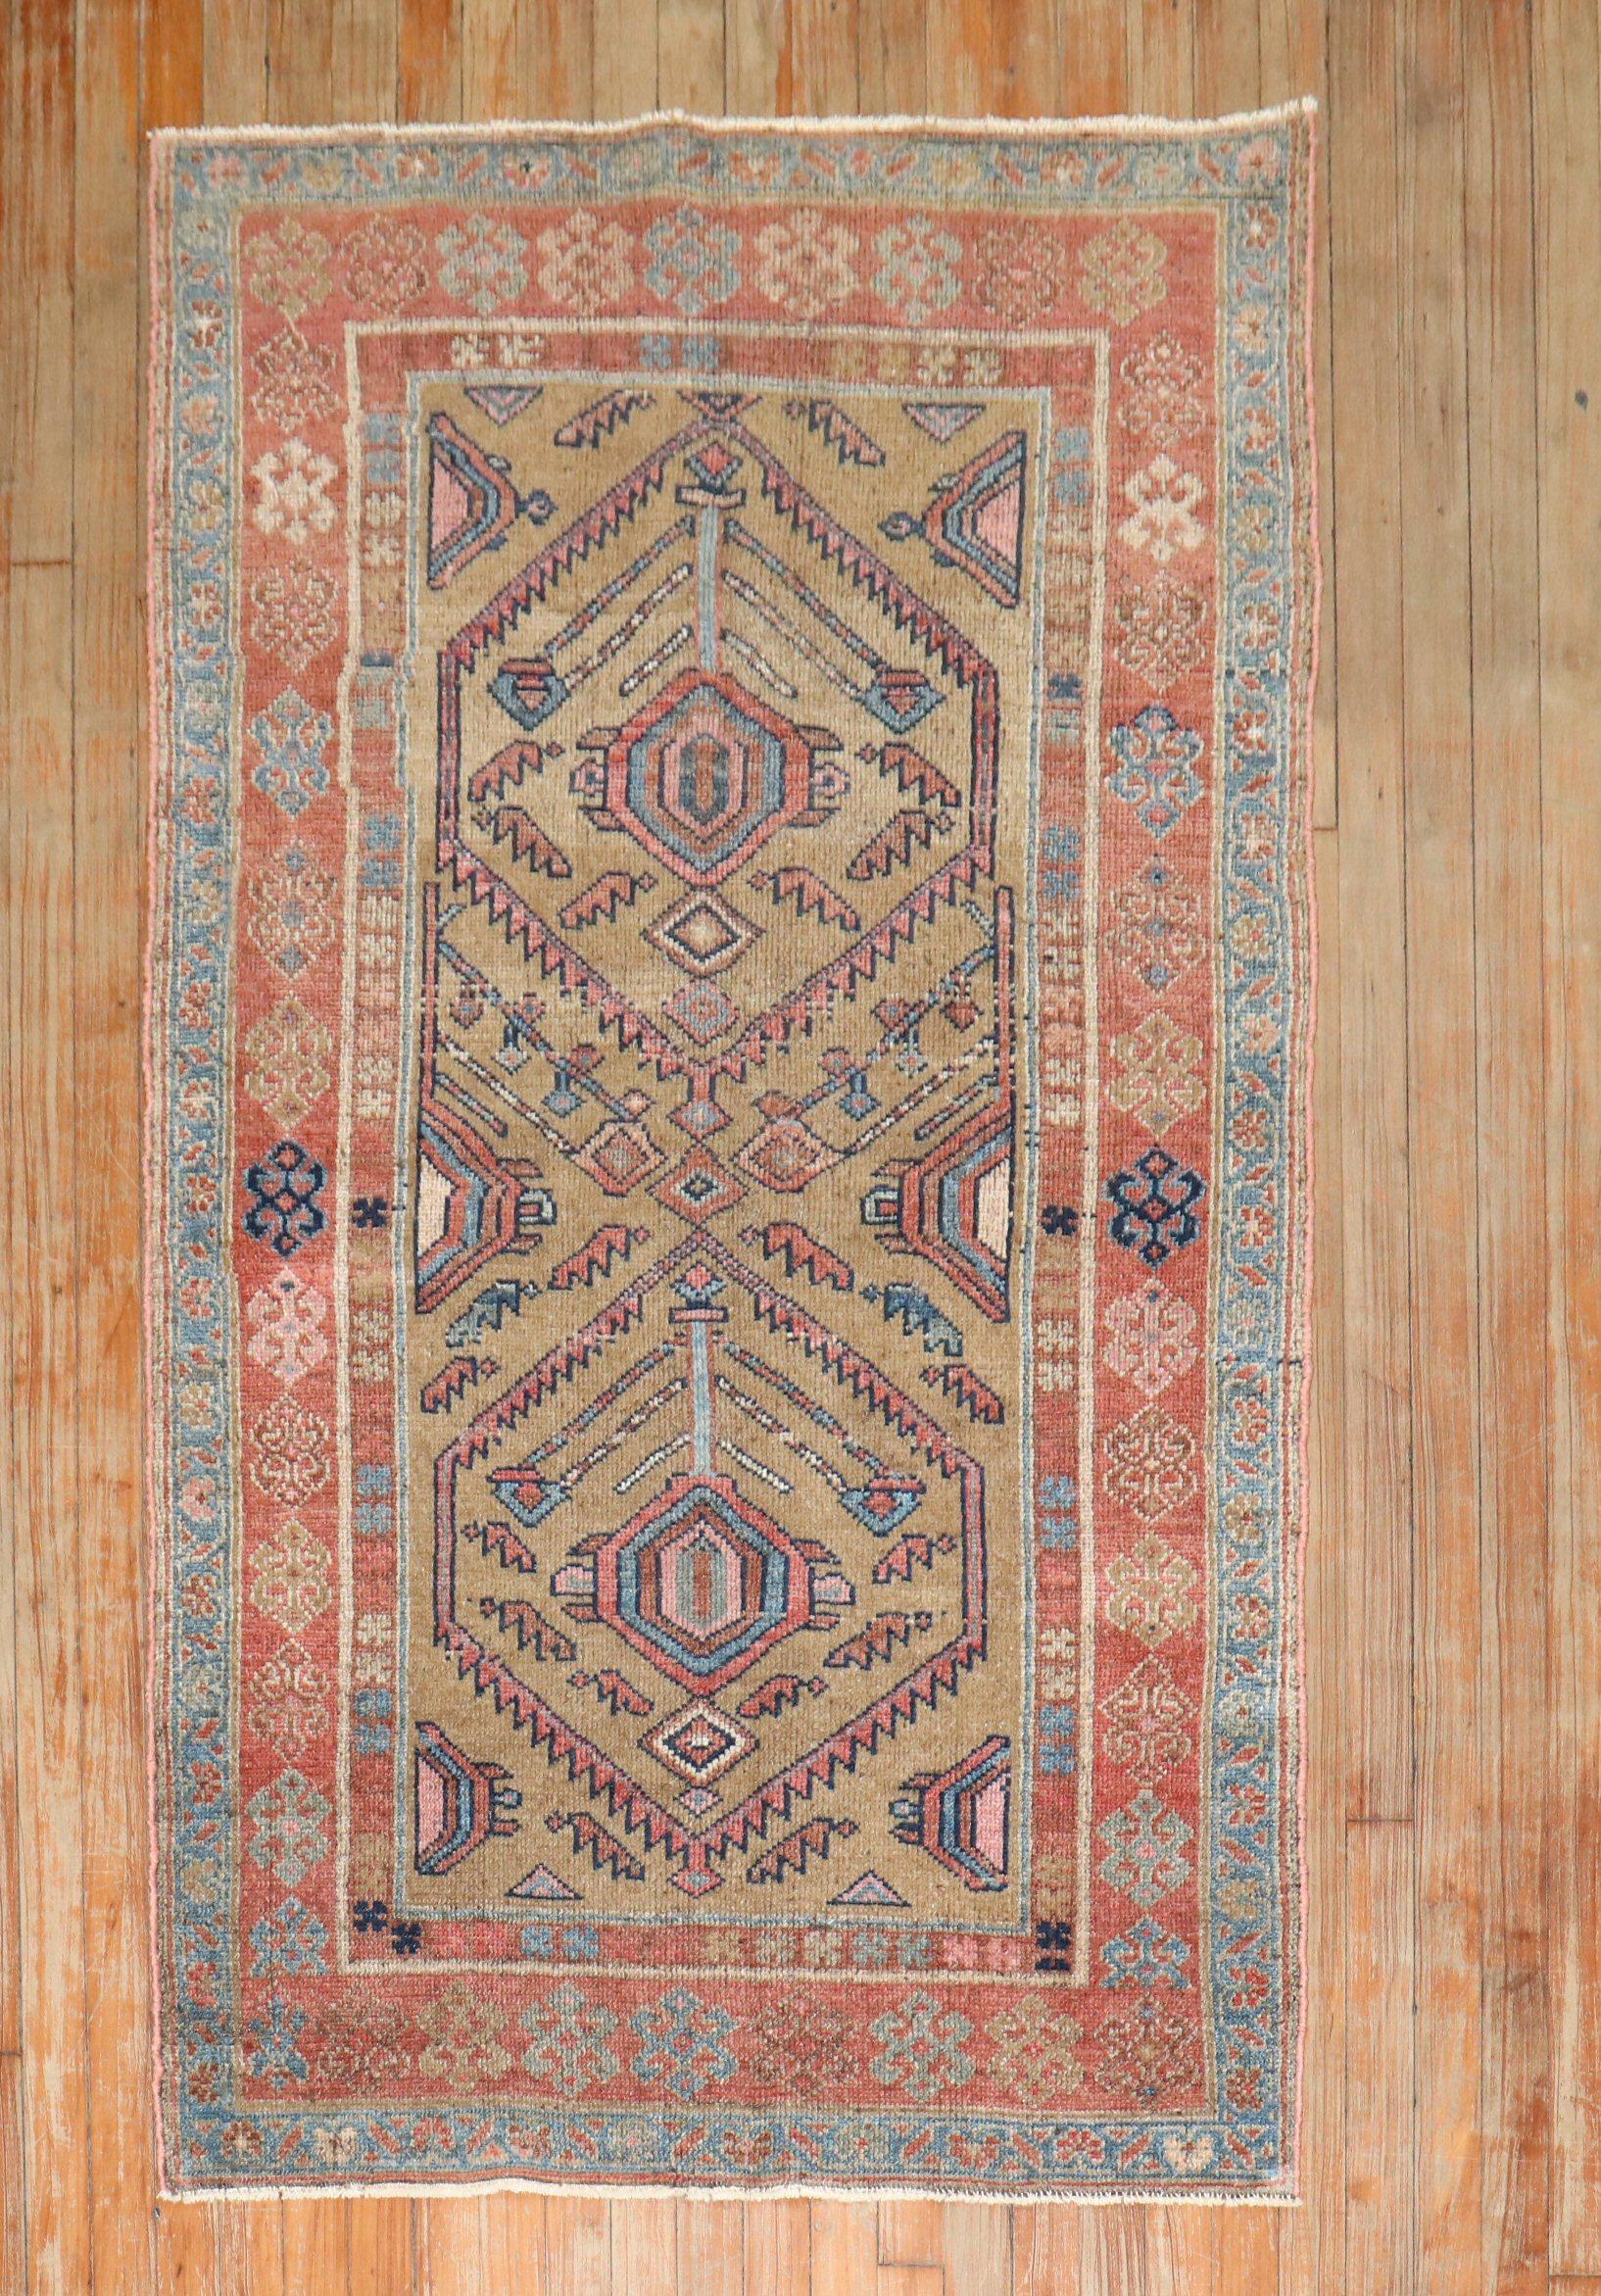 an early 20th-century Persian Hamadan light camel field scatter-size rug

Measures: 3'4'' x 5'10''